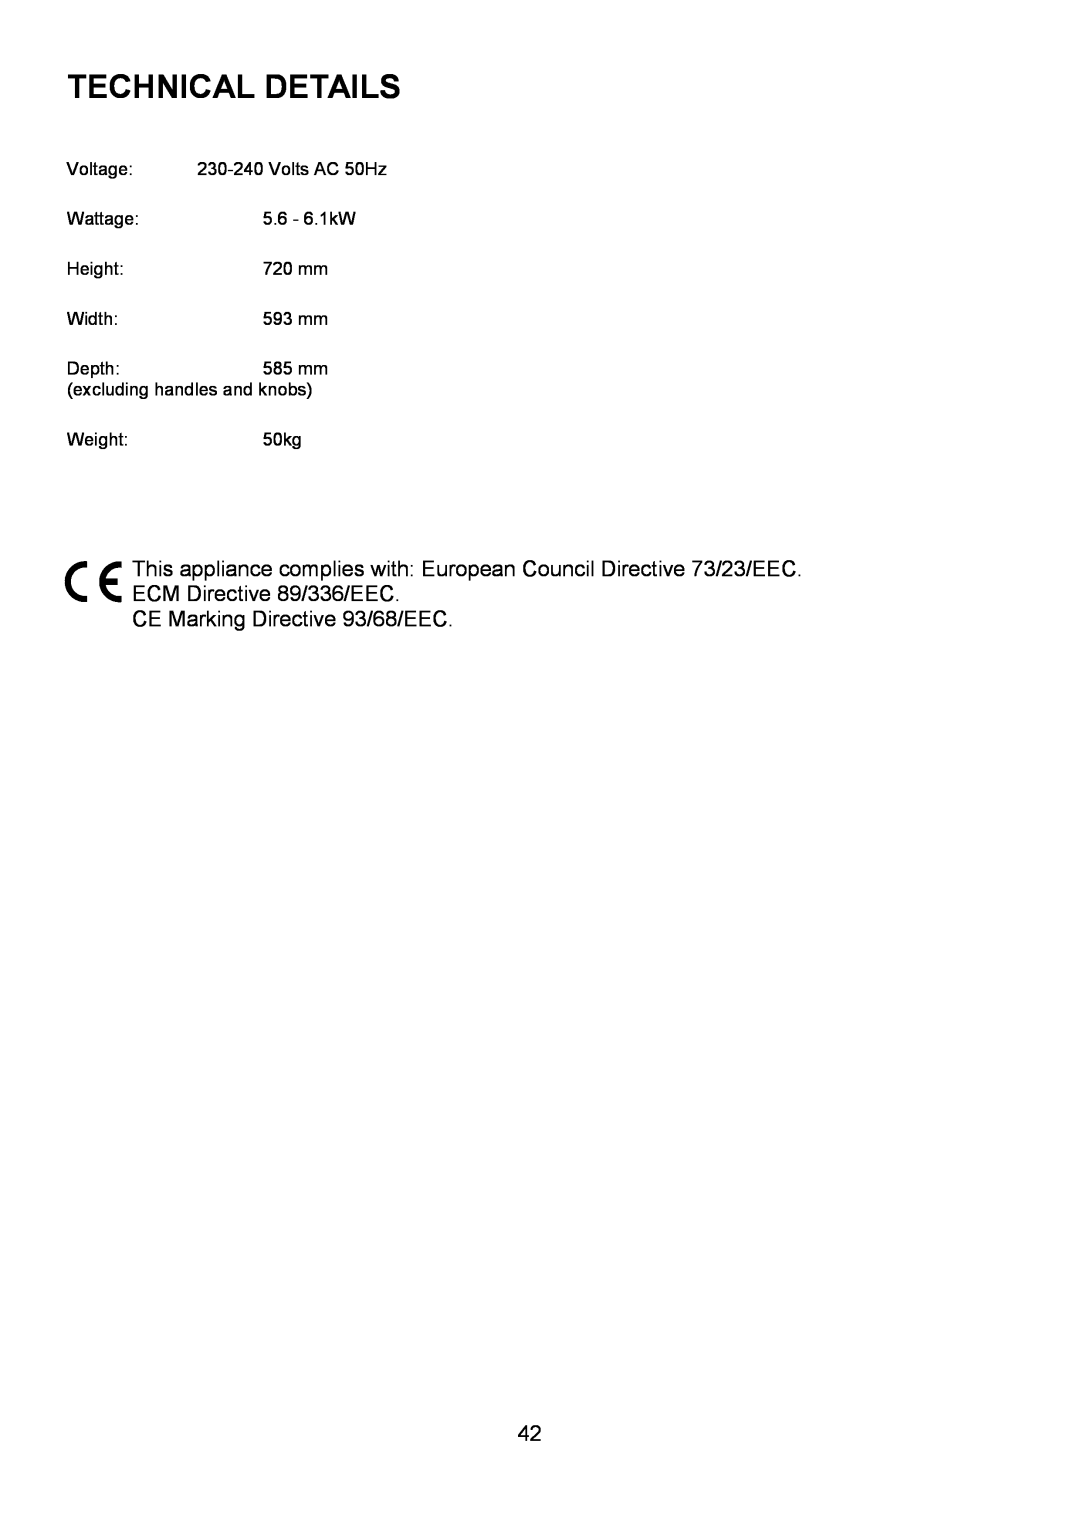 Electrolux U7101-4 operating instructions Technical Details, CE Marking Directive 93/68/EEC 